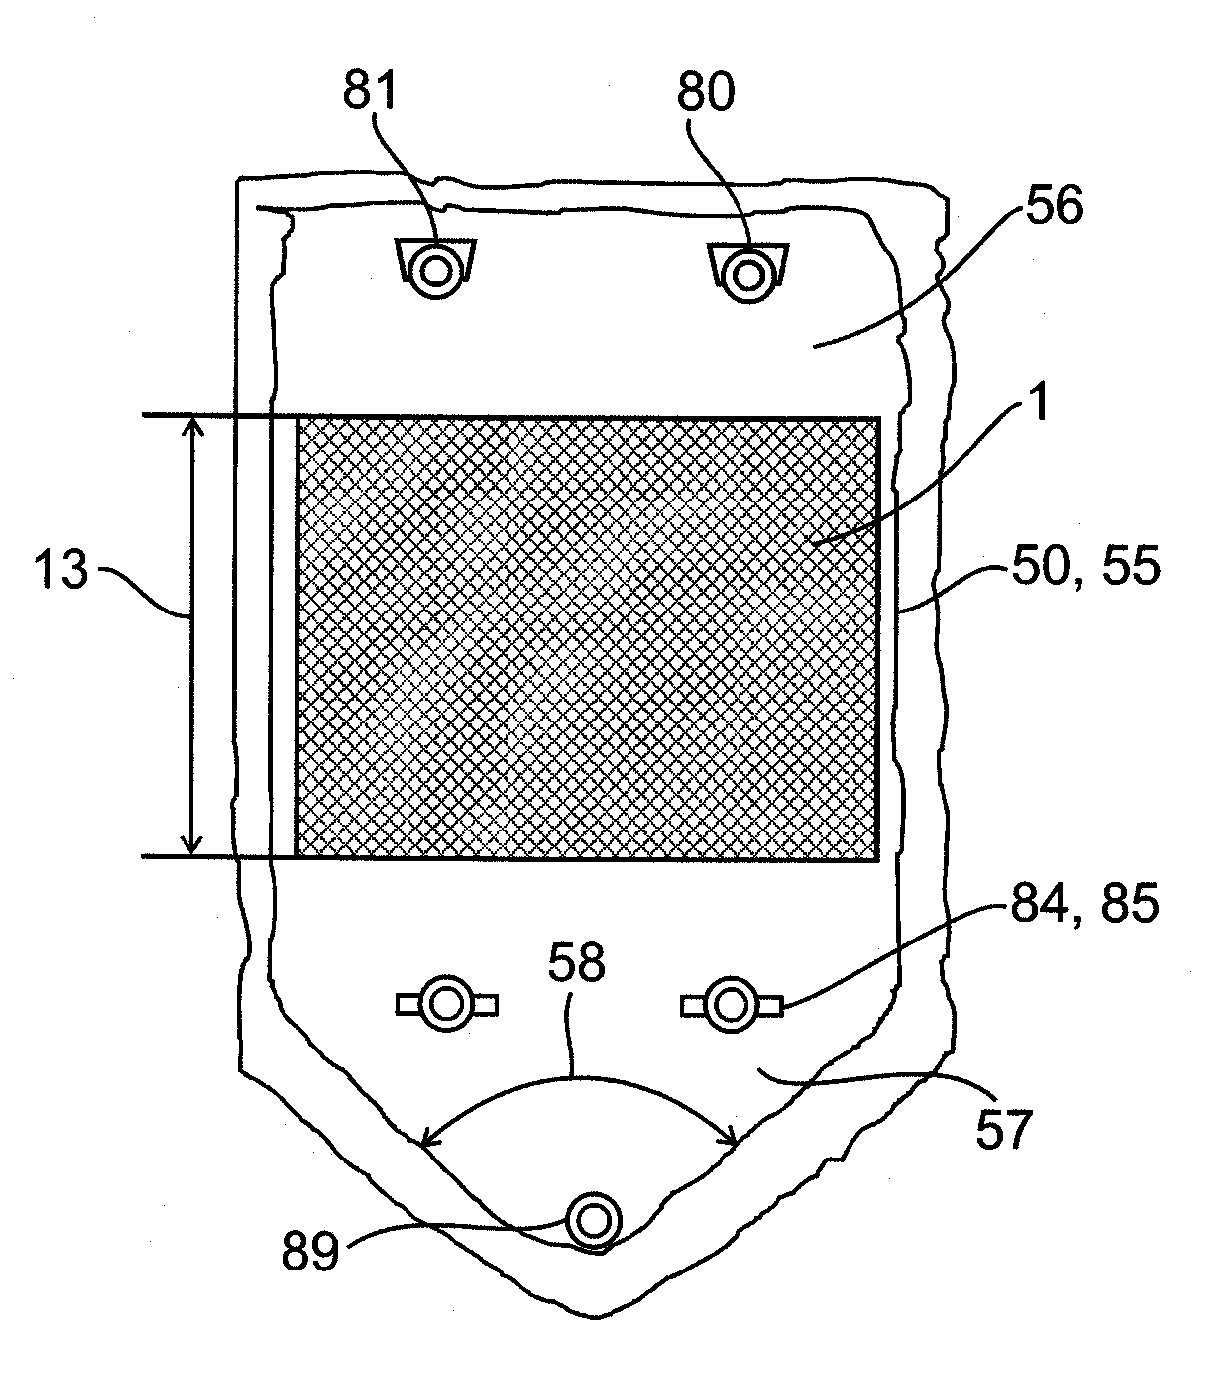 One-way separator for retaining and recirculating cells